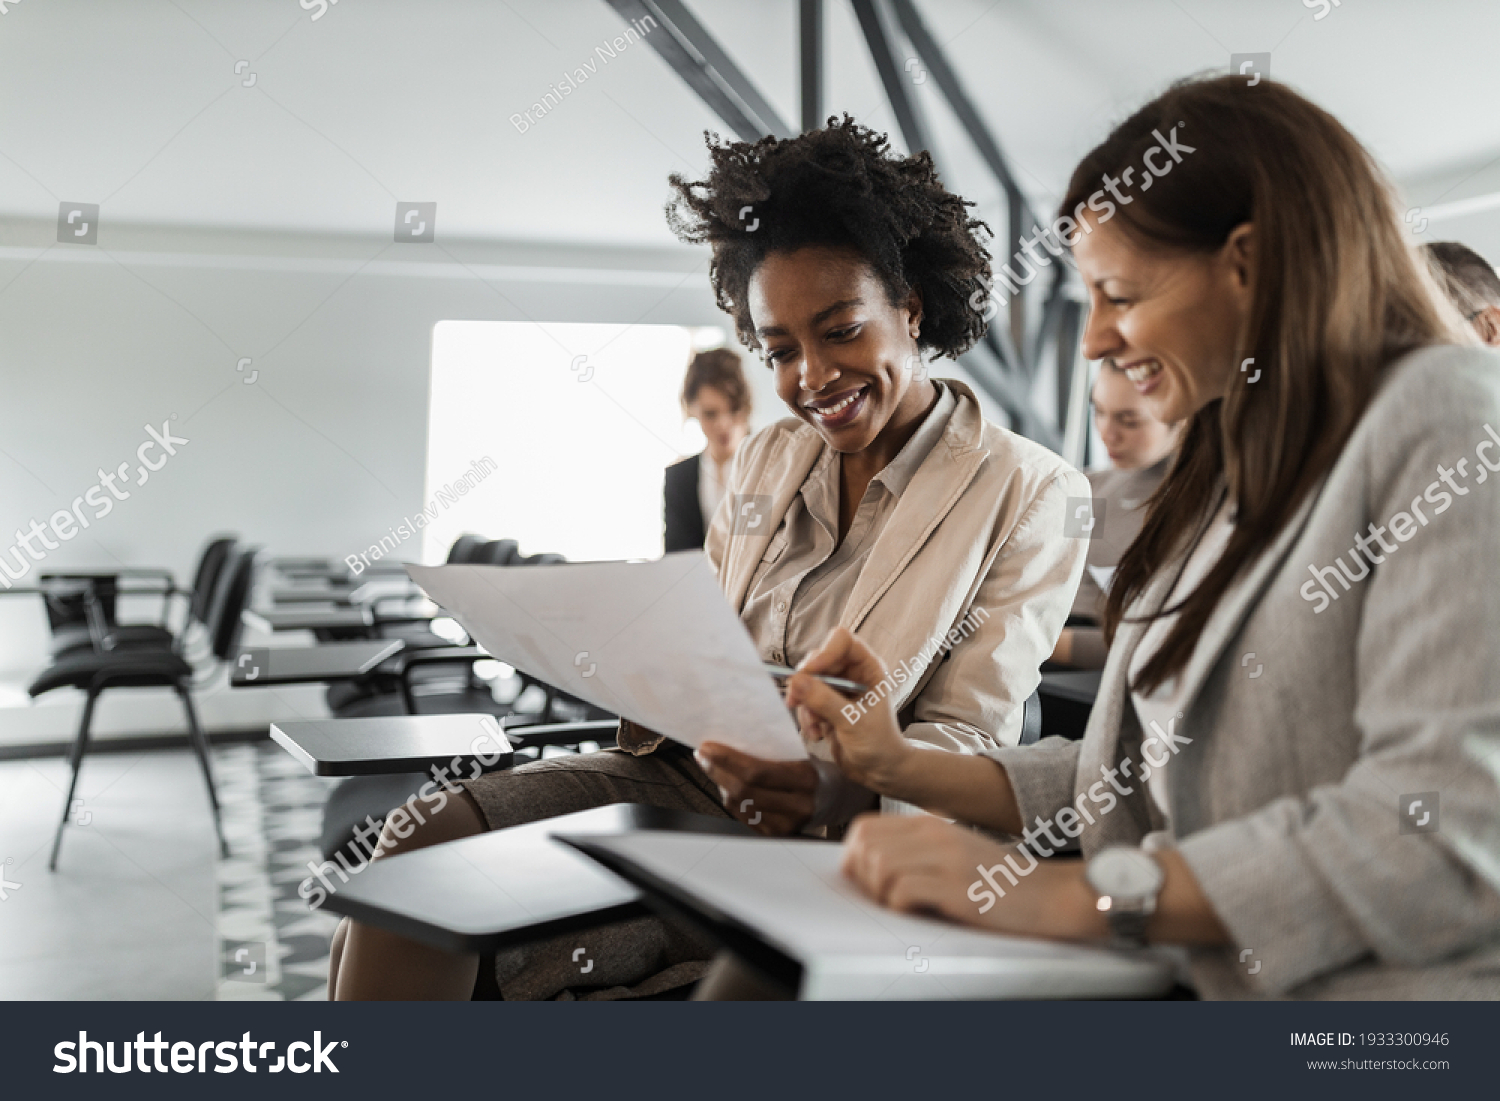 Two females in a suits, doing paper work. #1933300946